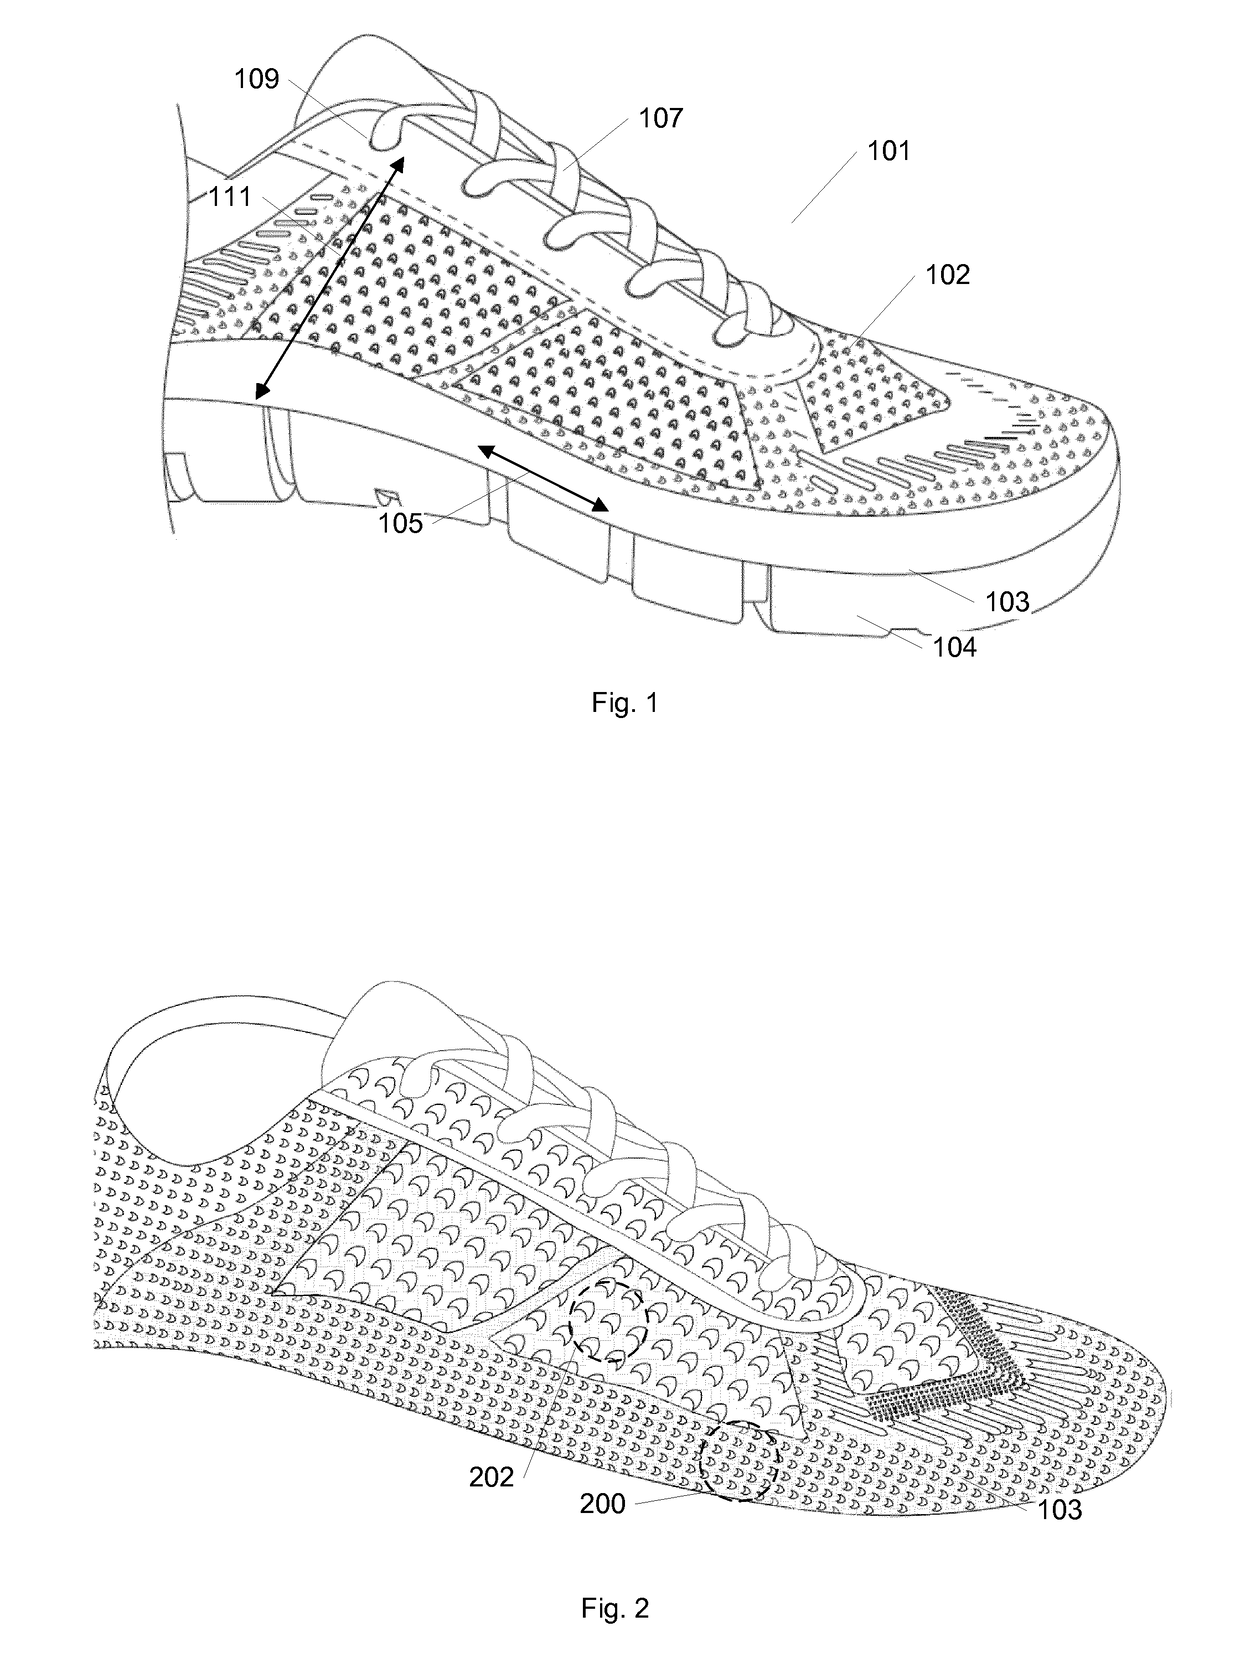 A knitted upper for a shoe with a molded sole and a shoe